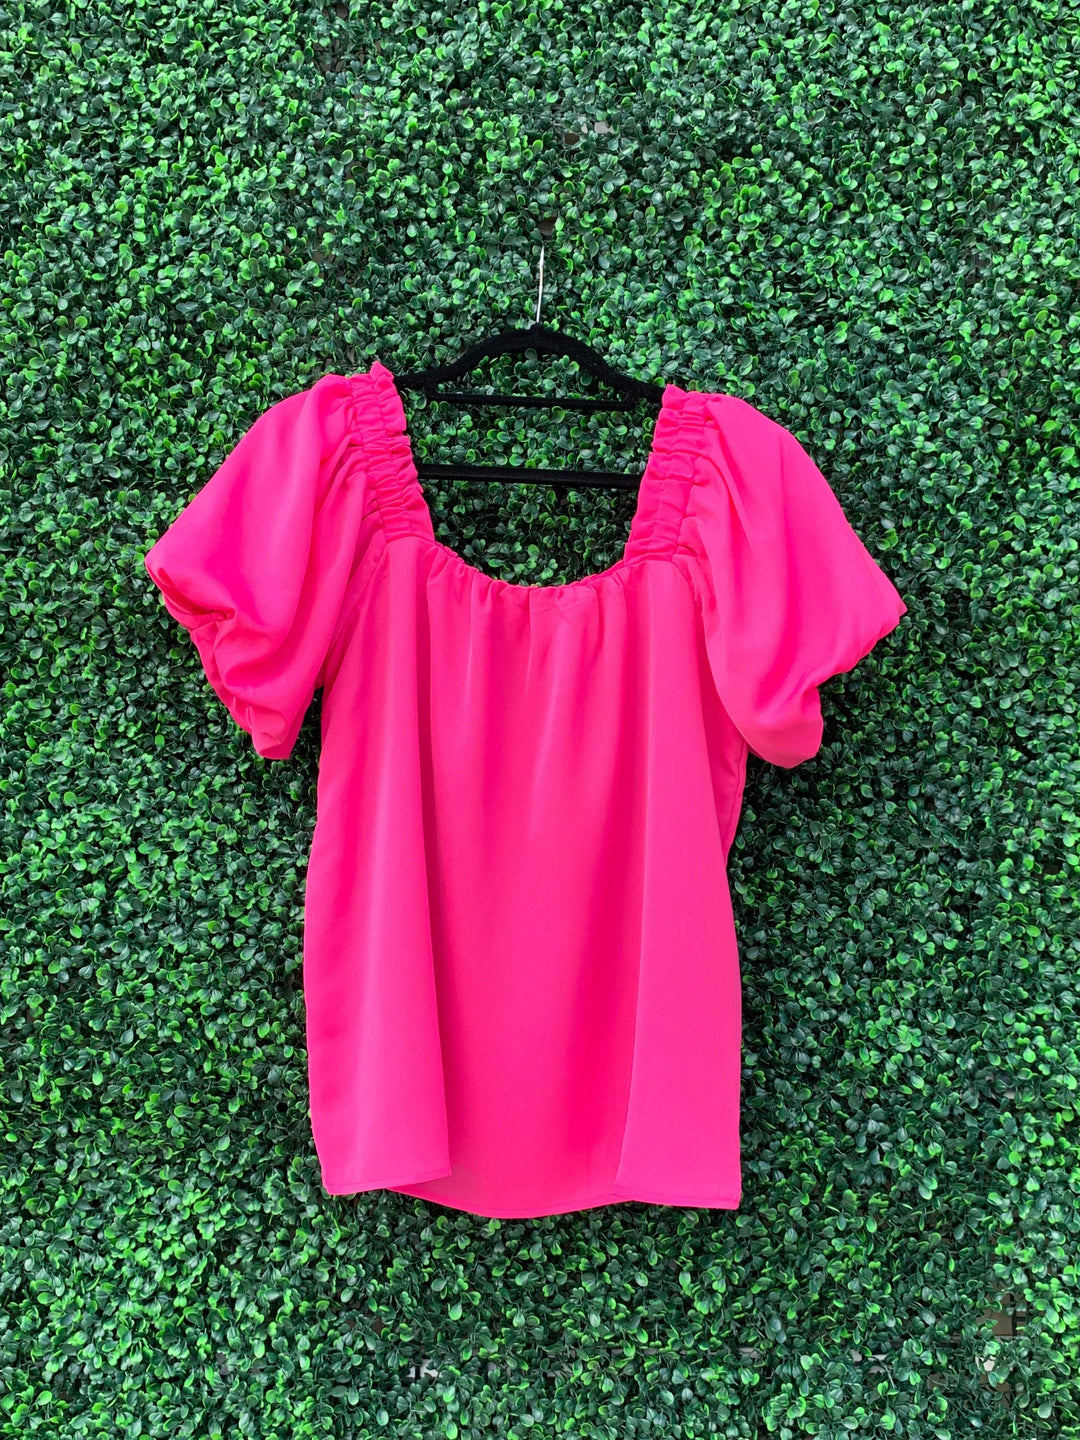 Make a statement in Houston Texas fashion scene with this Tres Chic shirt